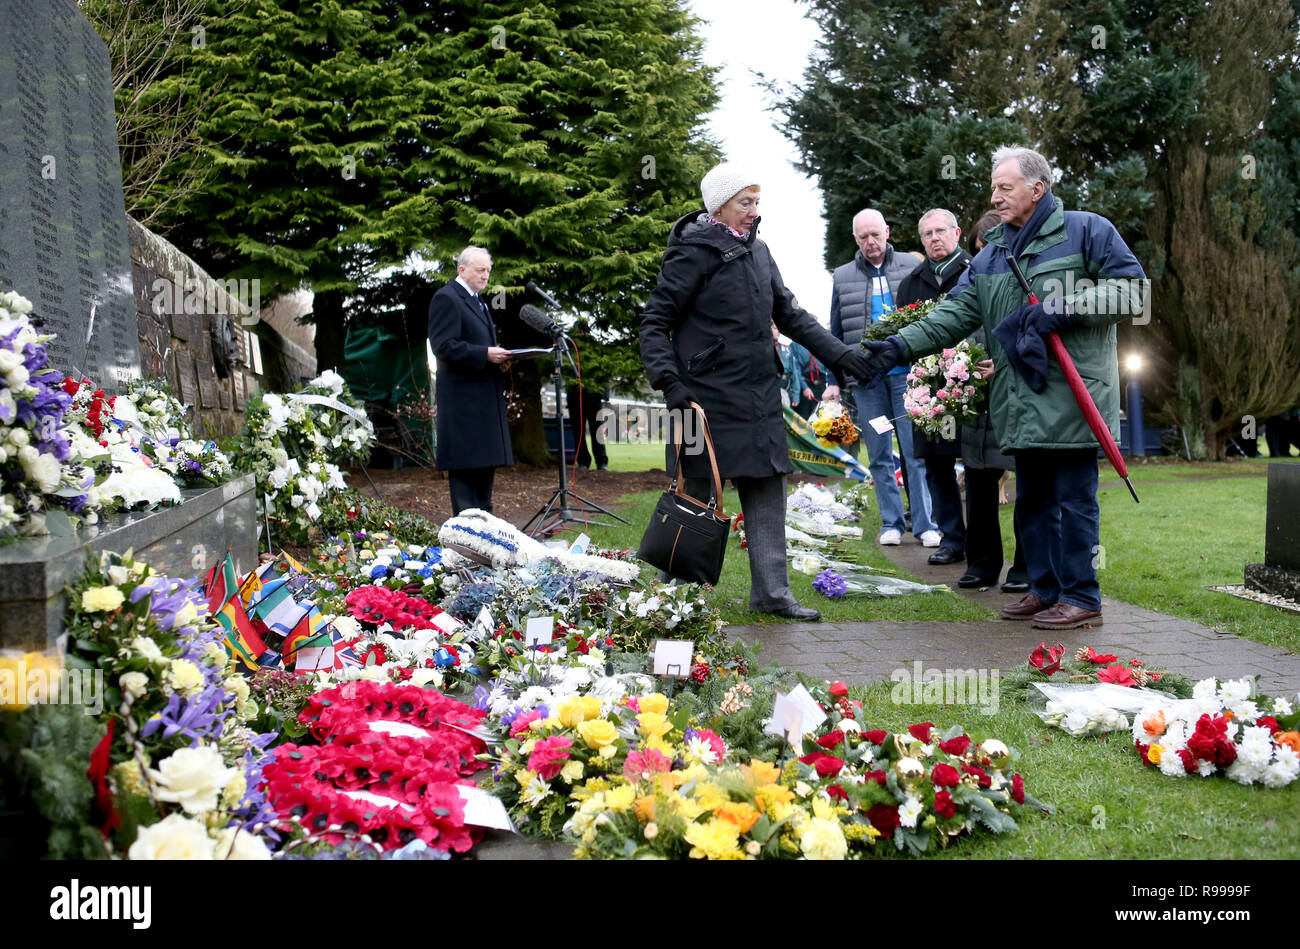 People pay their respects during the commemoration service in the Memorial Garden at Dryfesdale Cemetery in Lockerbie to mark the 30th anniversary of the Lockerbie bombing. Stock Photo